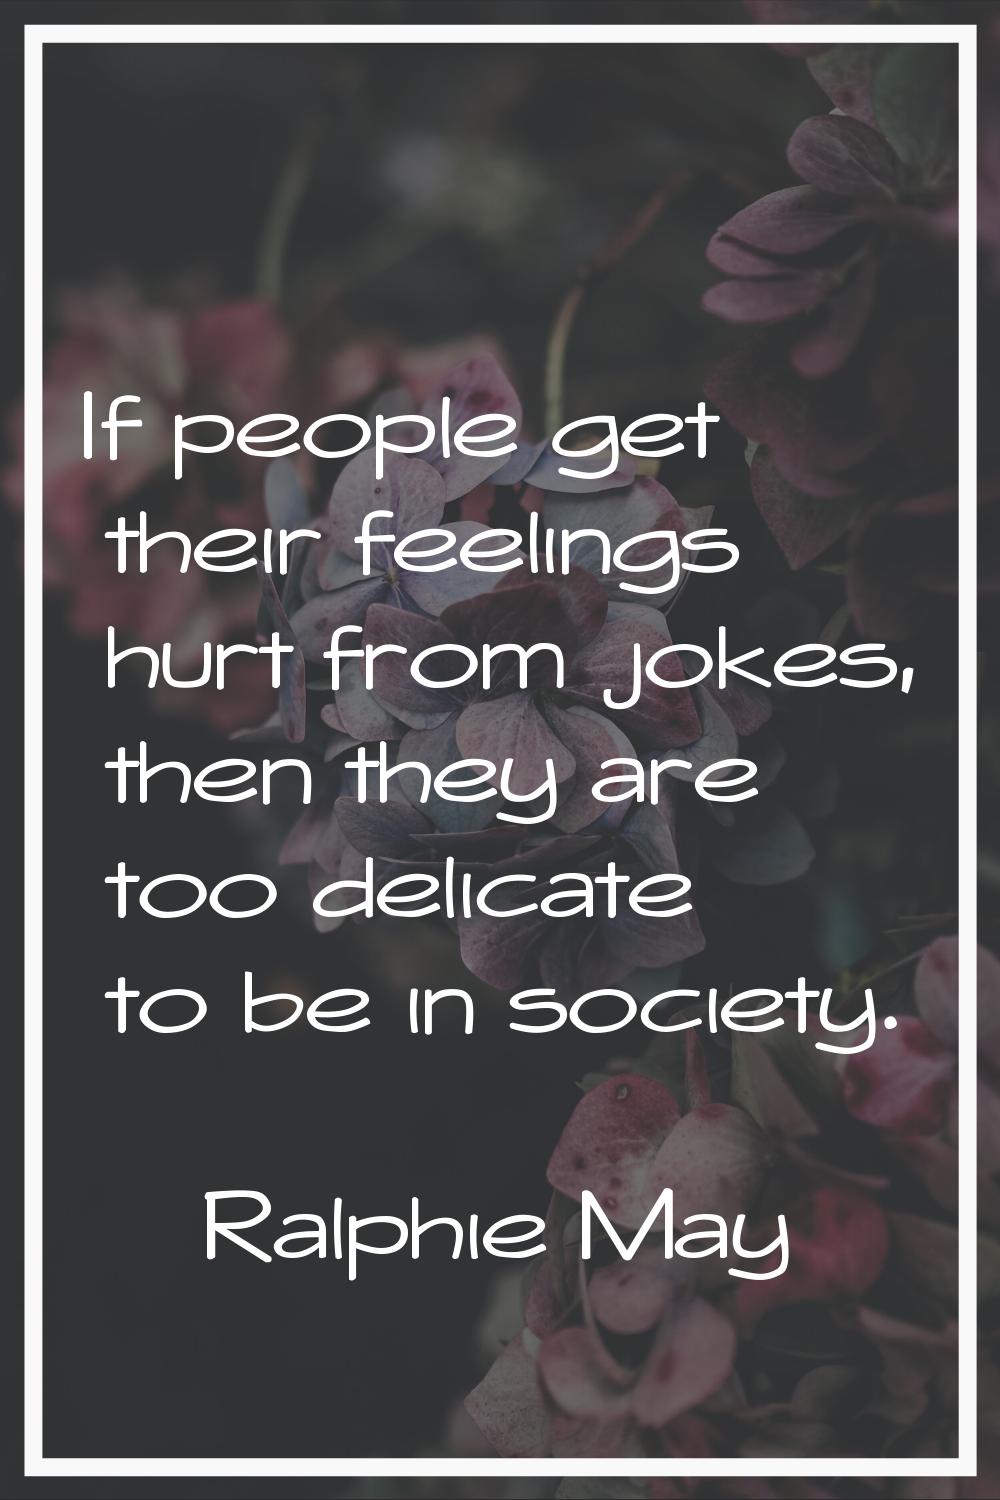 If people get their feelings hurt from jokes, then they are too delicate to be in society.